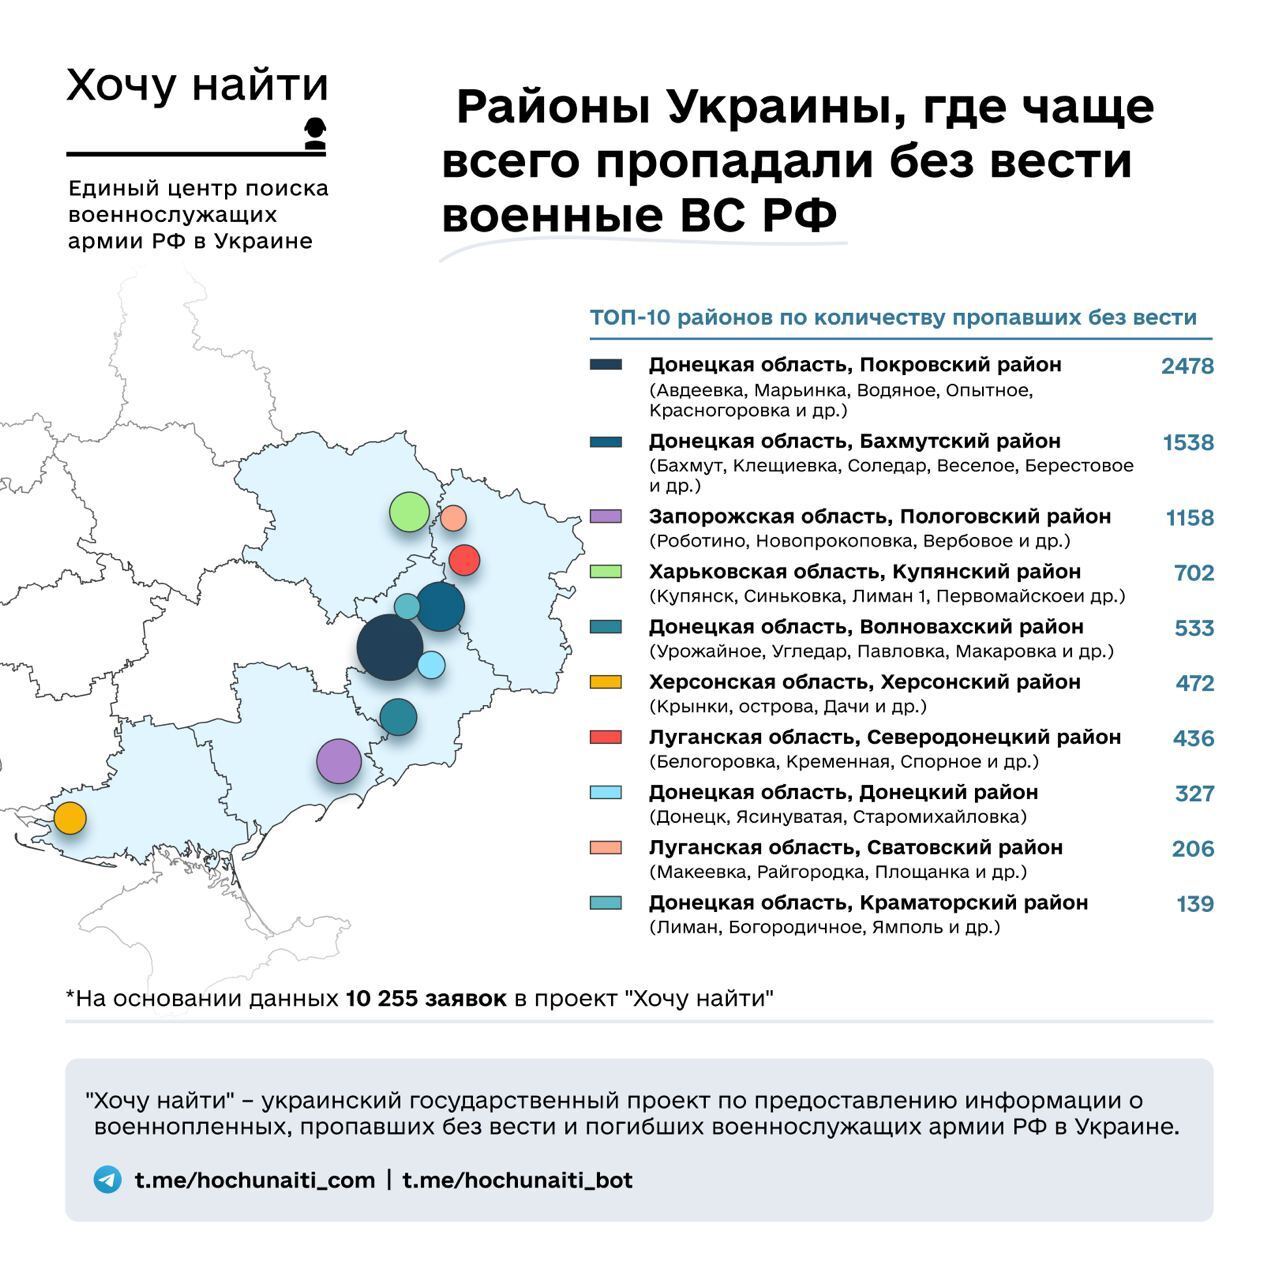 Where in Ukraine most Russian occupants ''disappeared'' and who is looking for them: data released